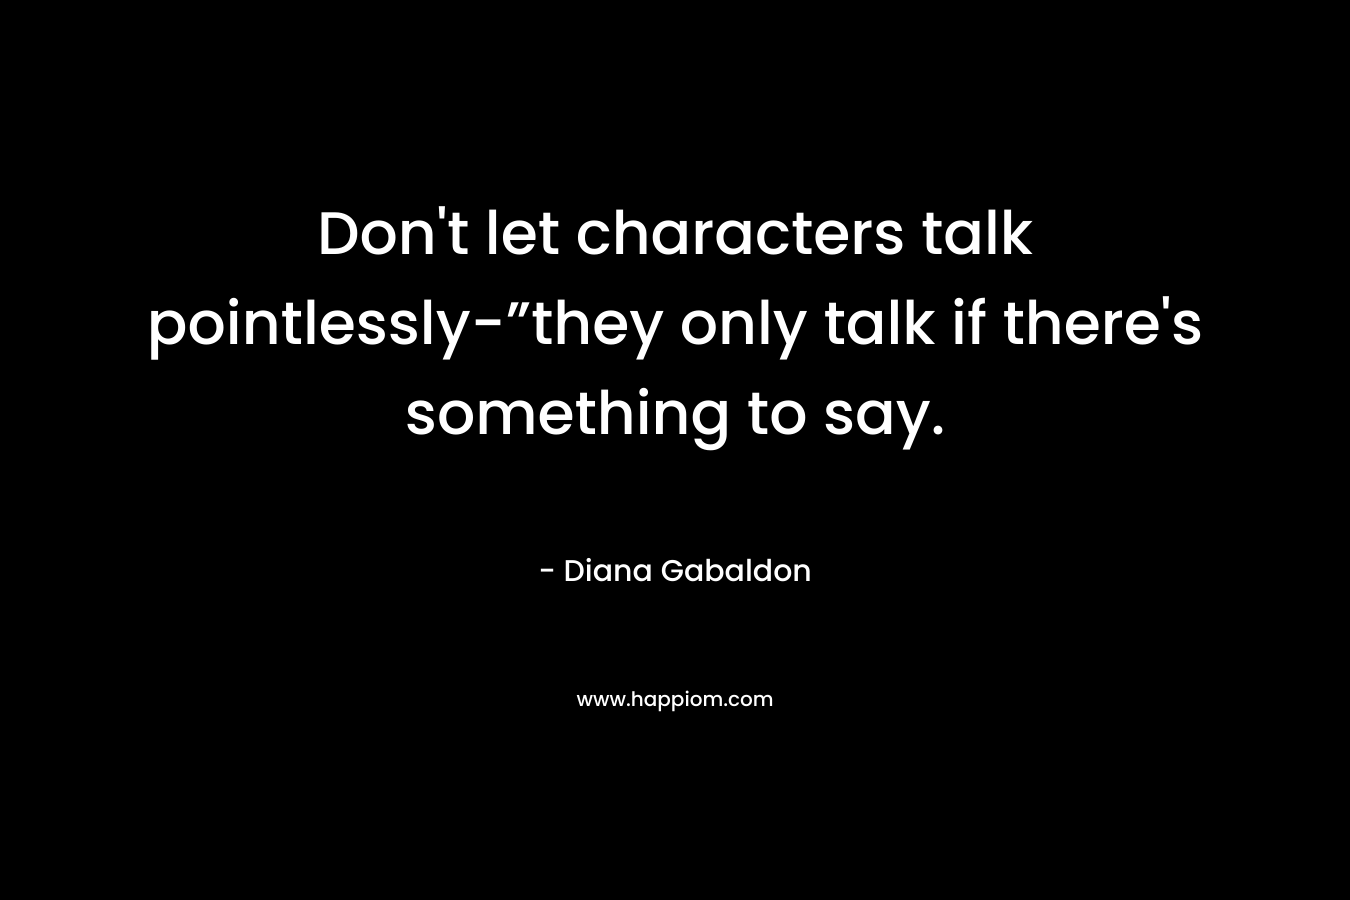 Don't let characters talk pointlessly-”they only talk if there's something to say.